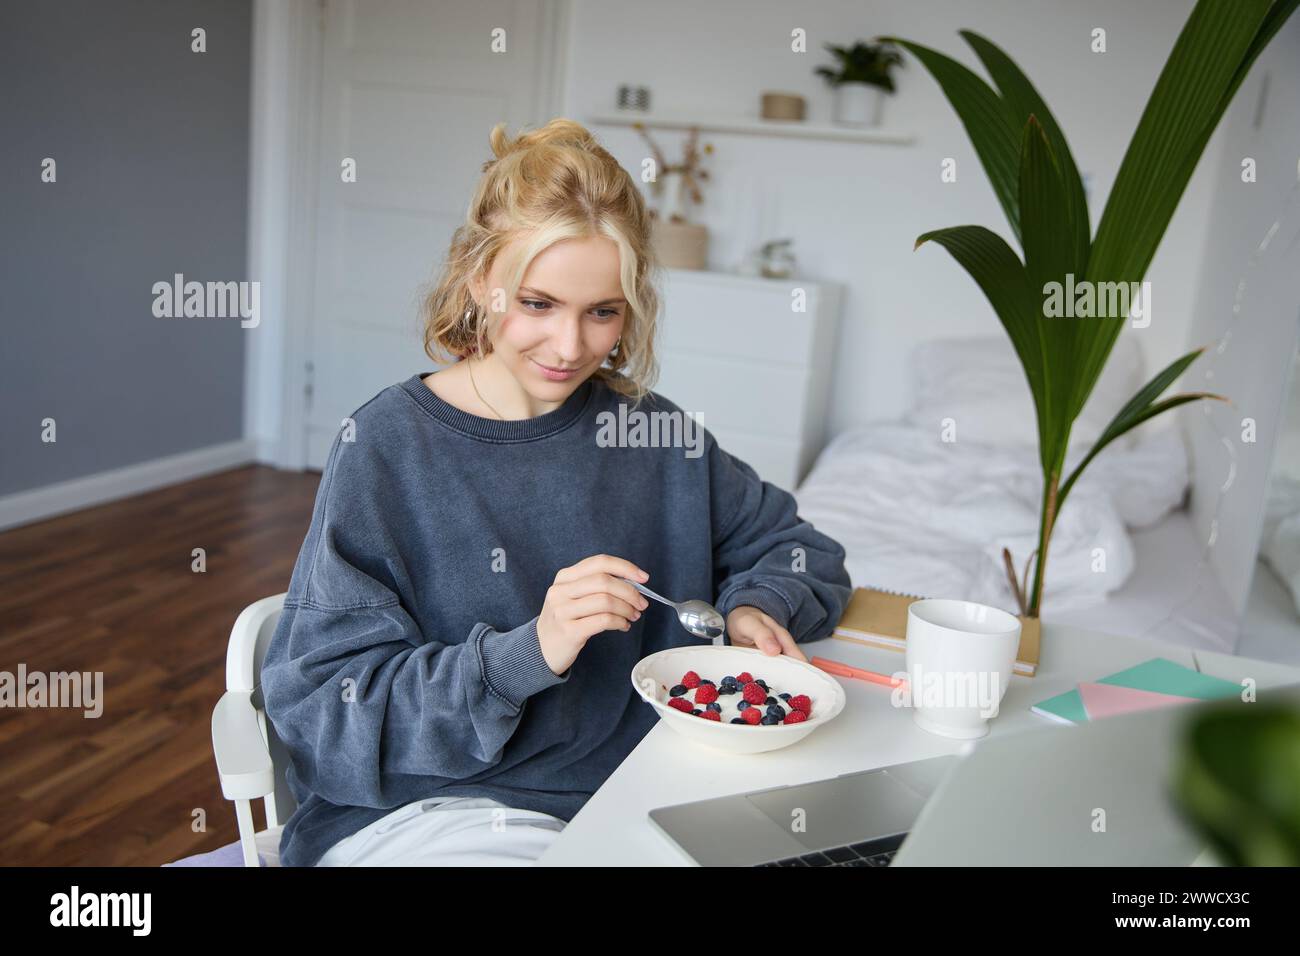 Portrait of young candid girl watching videos on laptop, enjoying movie and eating in front of laptop, having breakfast and staring at screen. Stock Photo